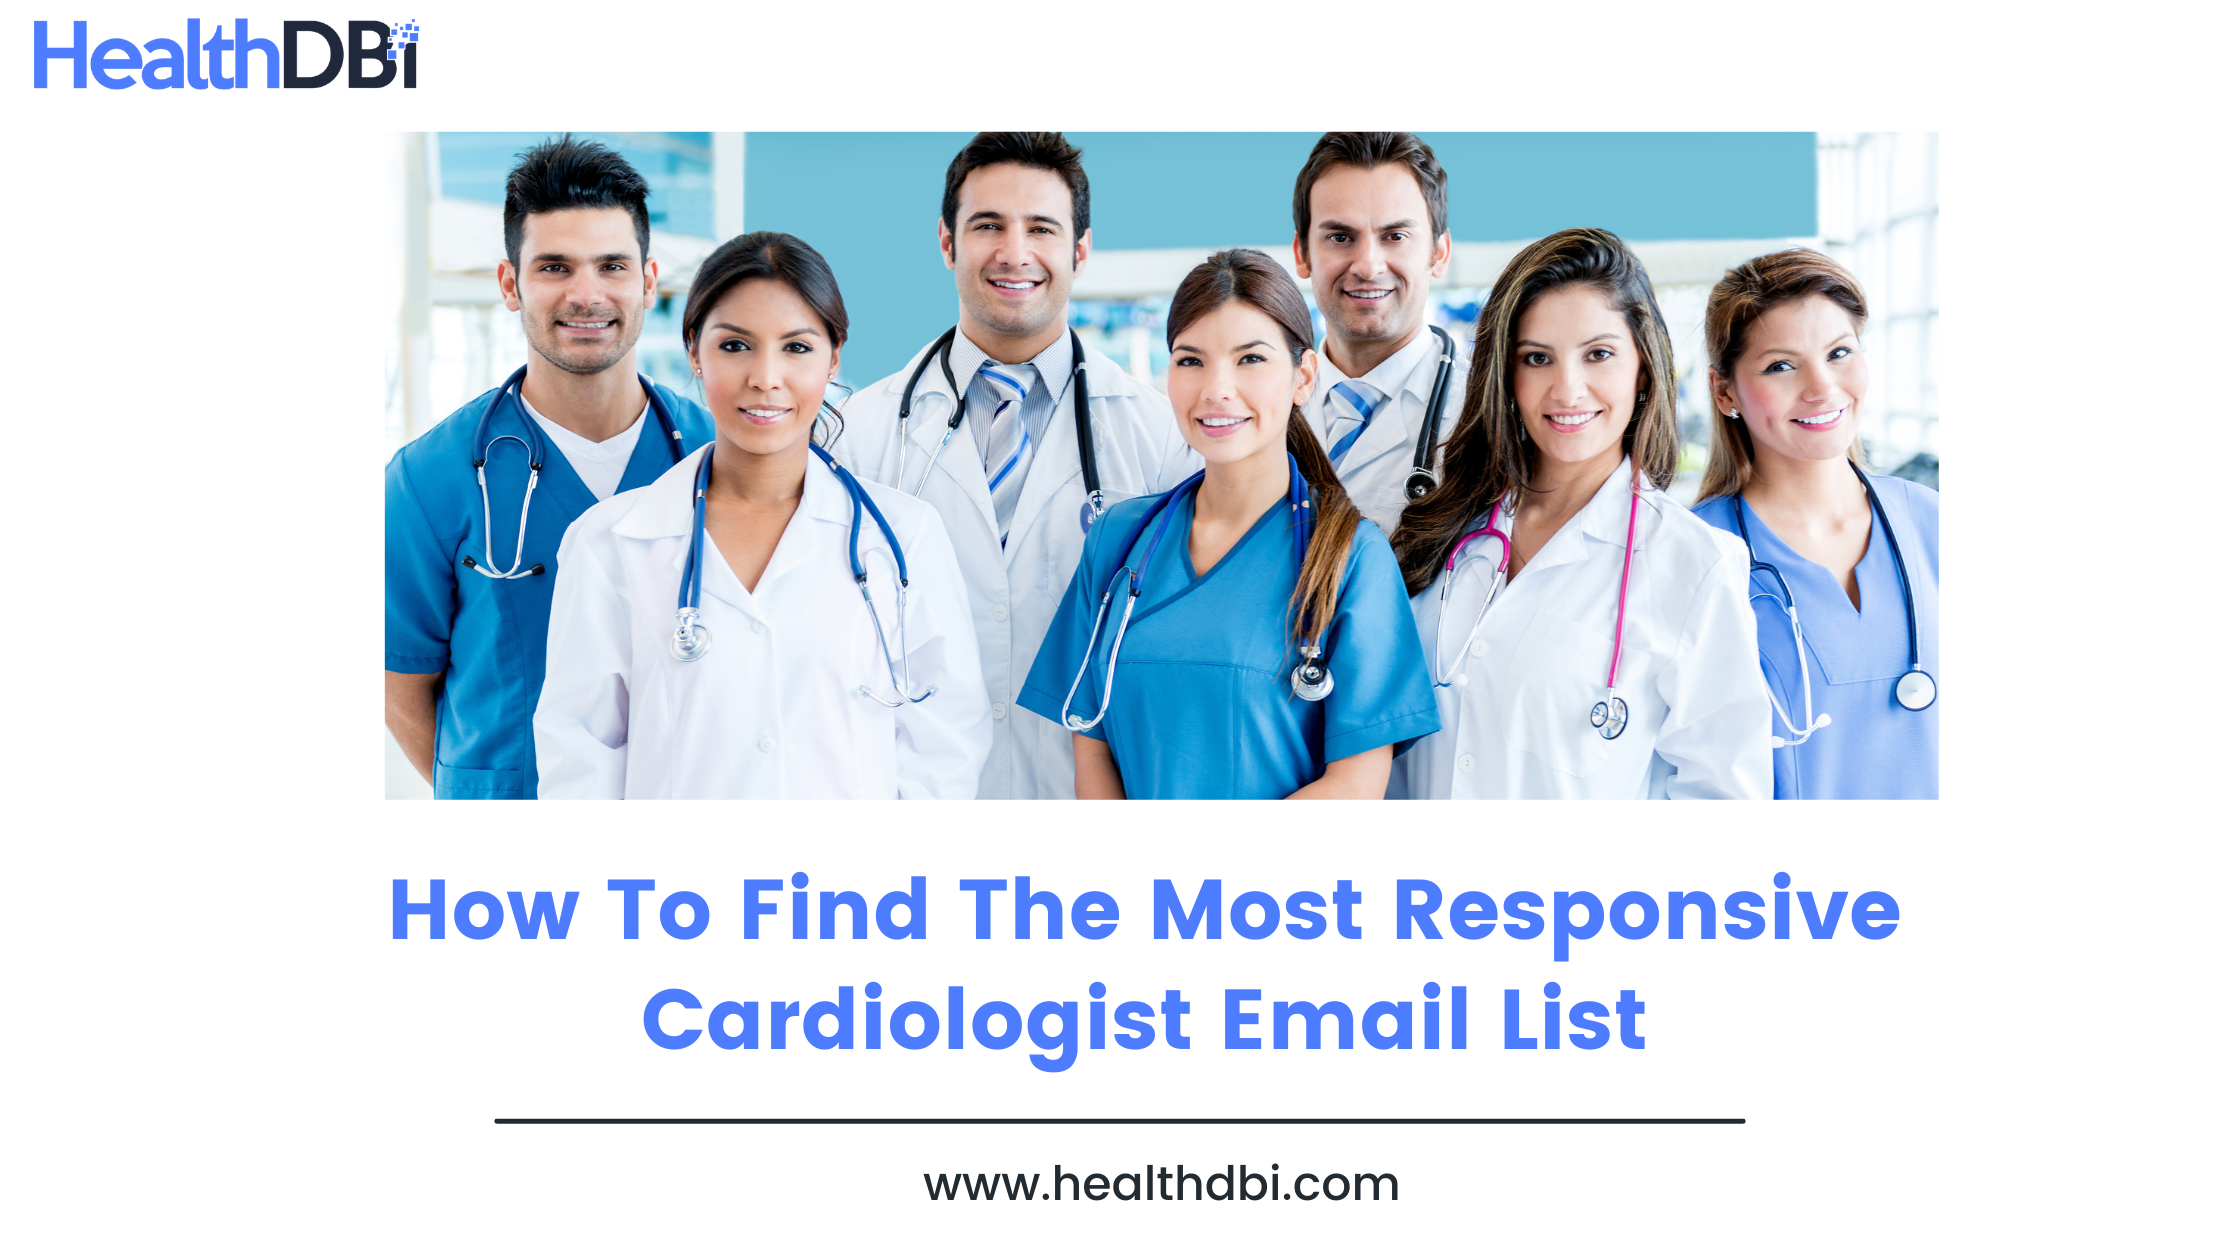 Cardiologist-email-list